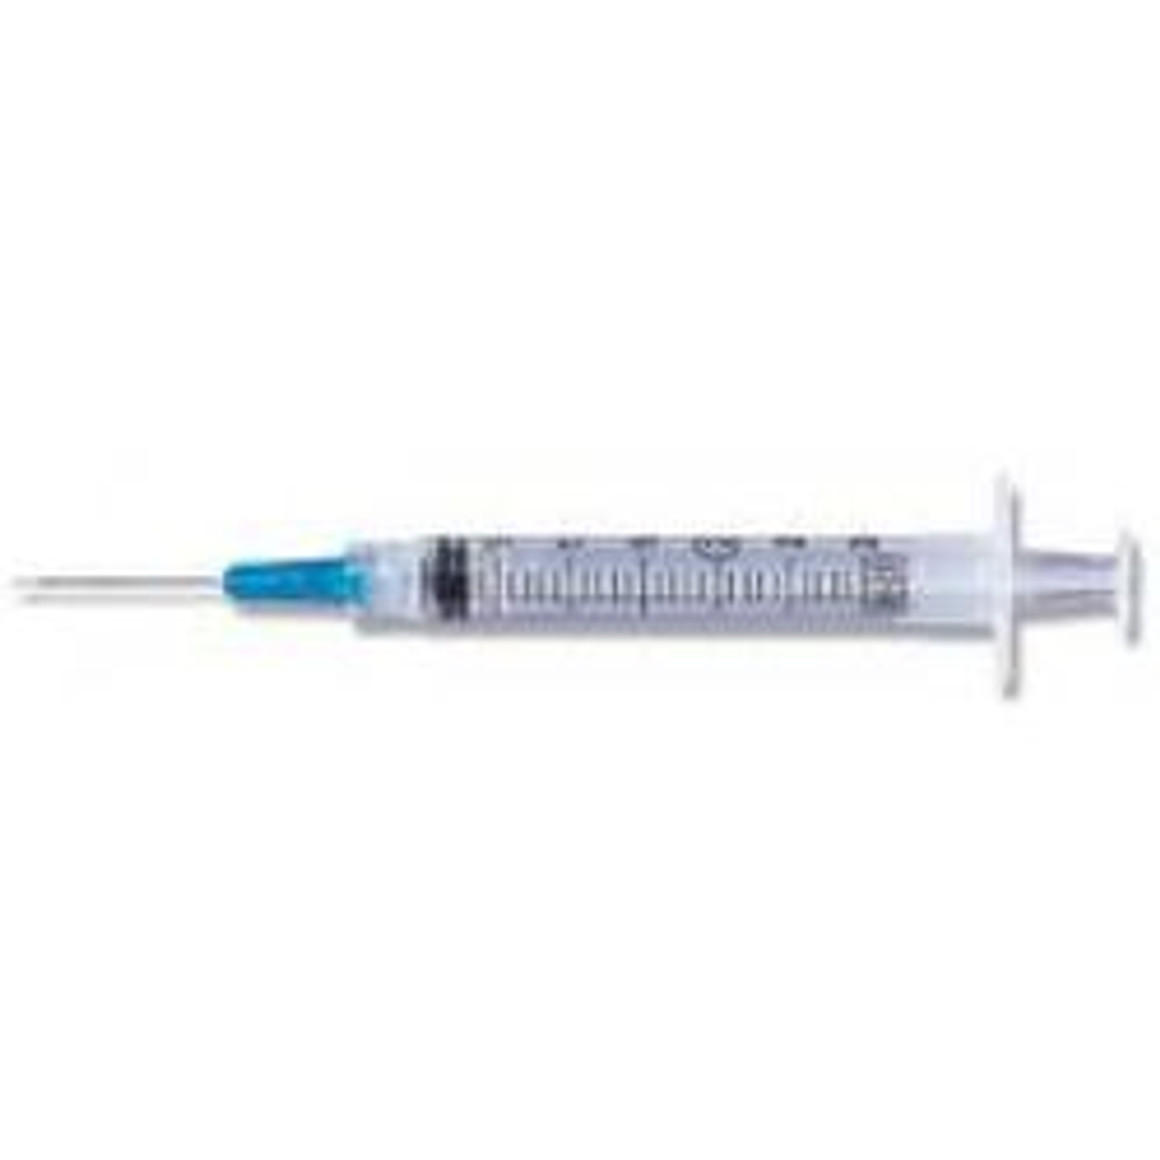 BD Luer-Lok Syringe with PrecisionGlide Needle Combination, 18G x 1.5", 3mL